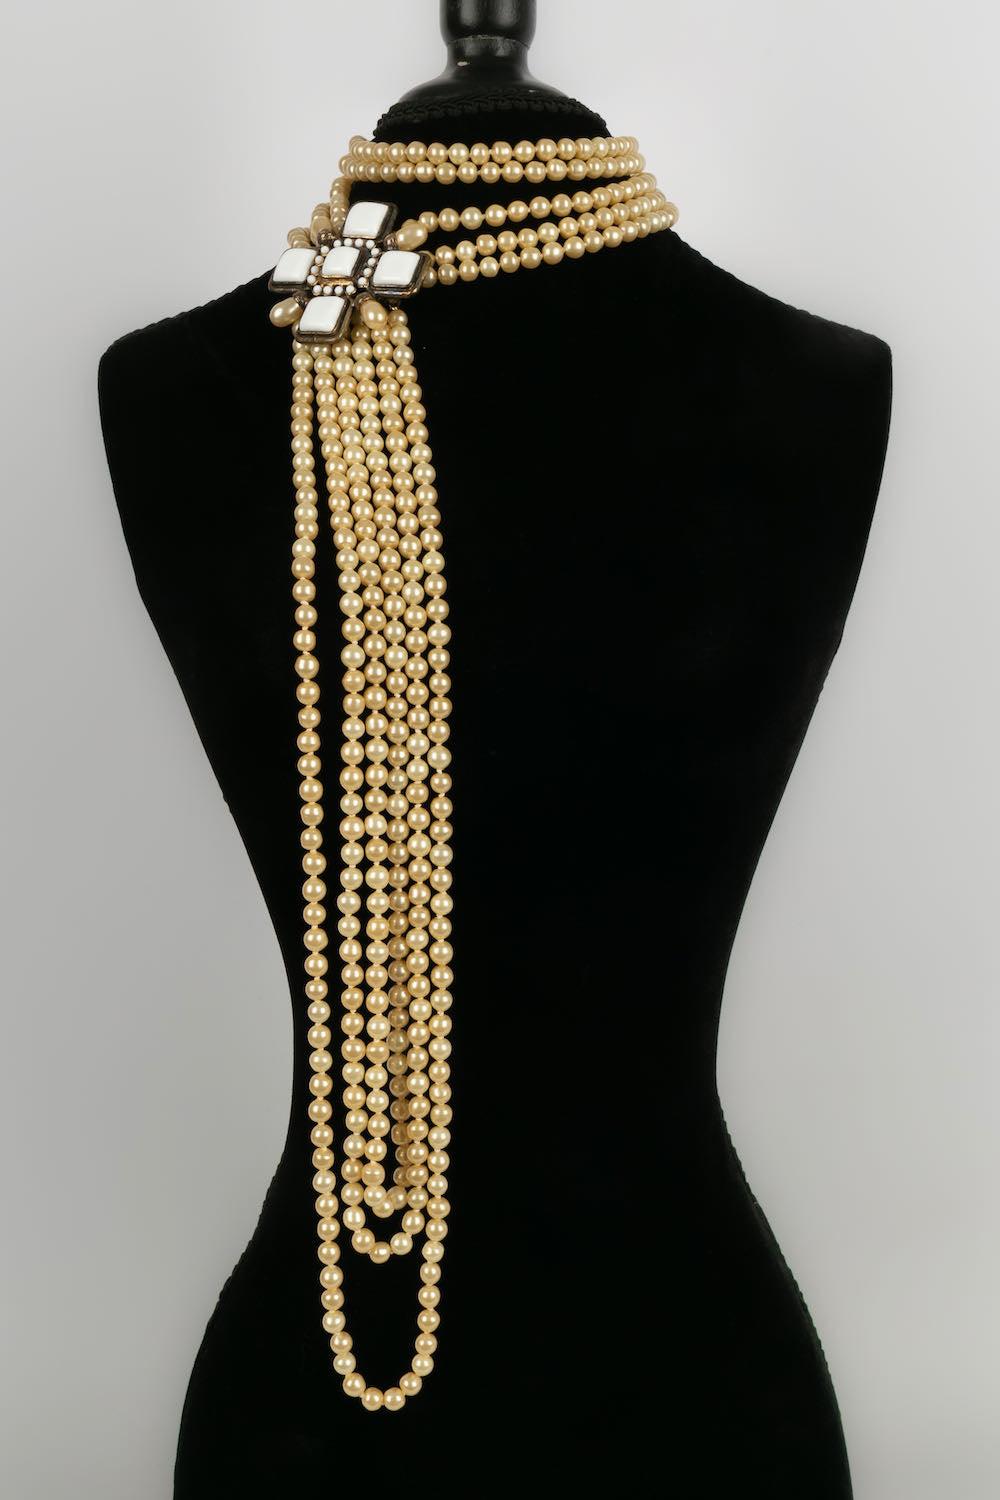 Chanel -(Made in France) Necklace of pearls and jewel in gold metal and white glass paste. Spring-Summer 2001 collection.

Additional information: 
Dimensions: Length : 33 cm
Condition: Very good condition
Seller Ref number: CB78